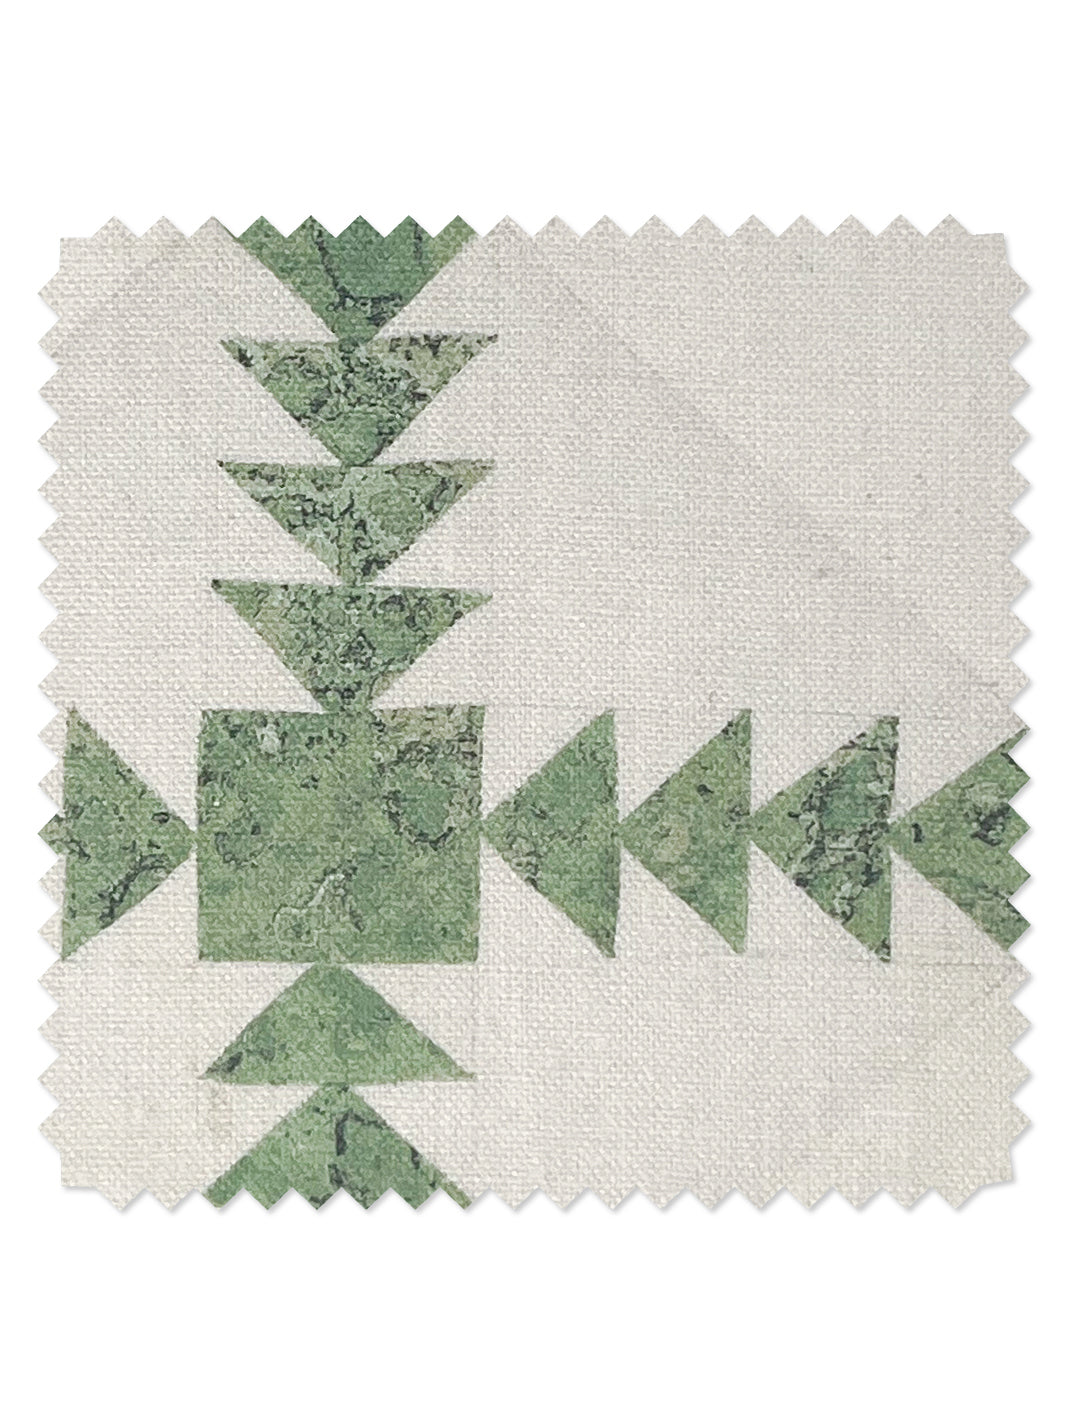 'Borden' Linen Fabric by Nathan Turner - Green